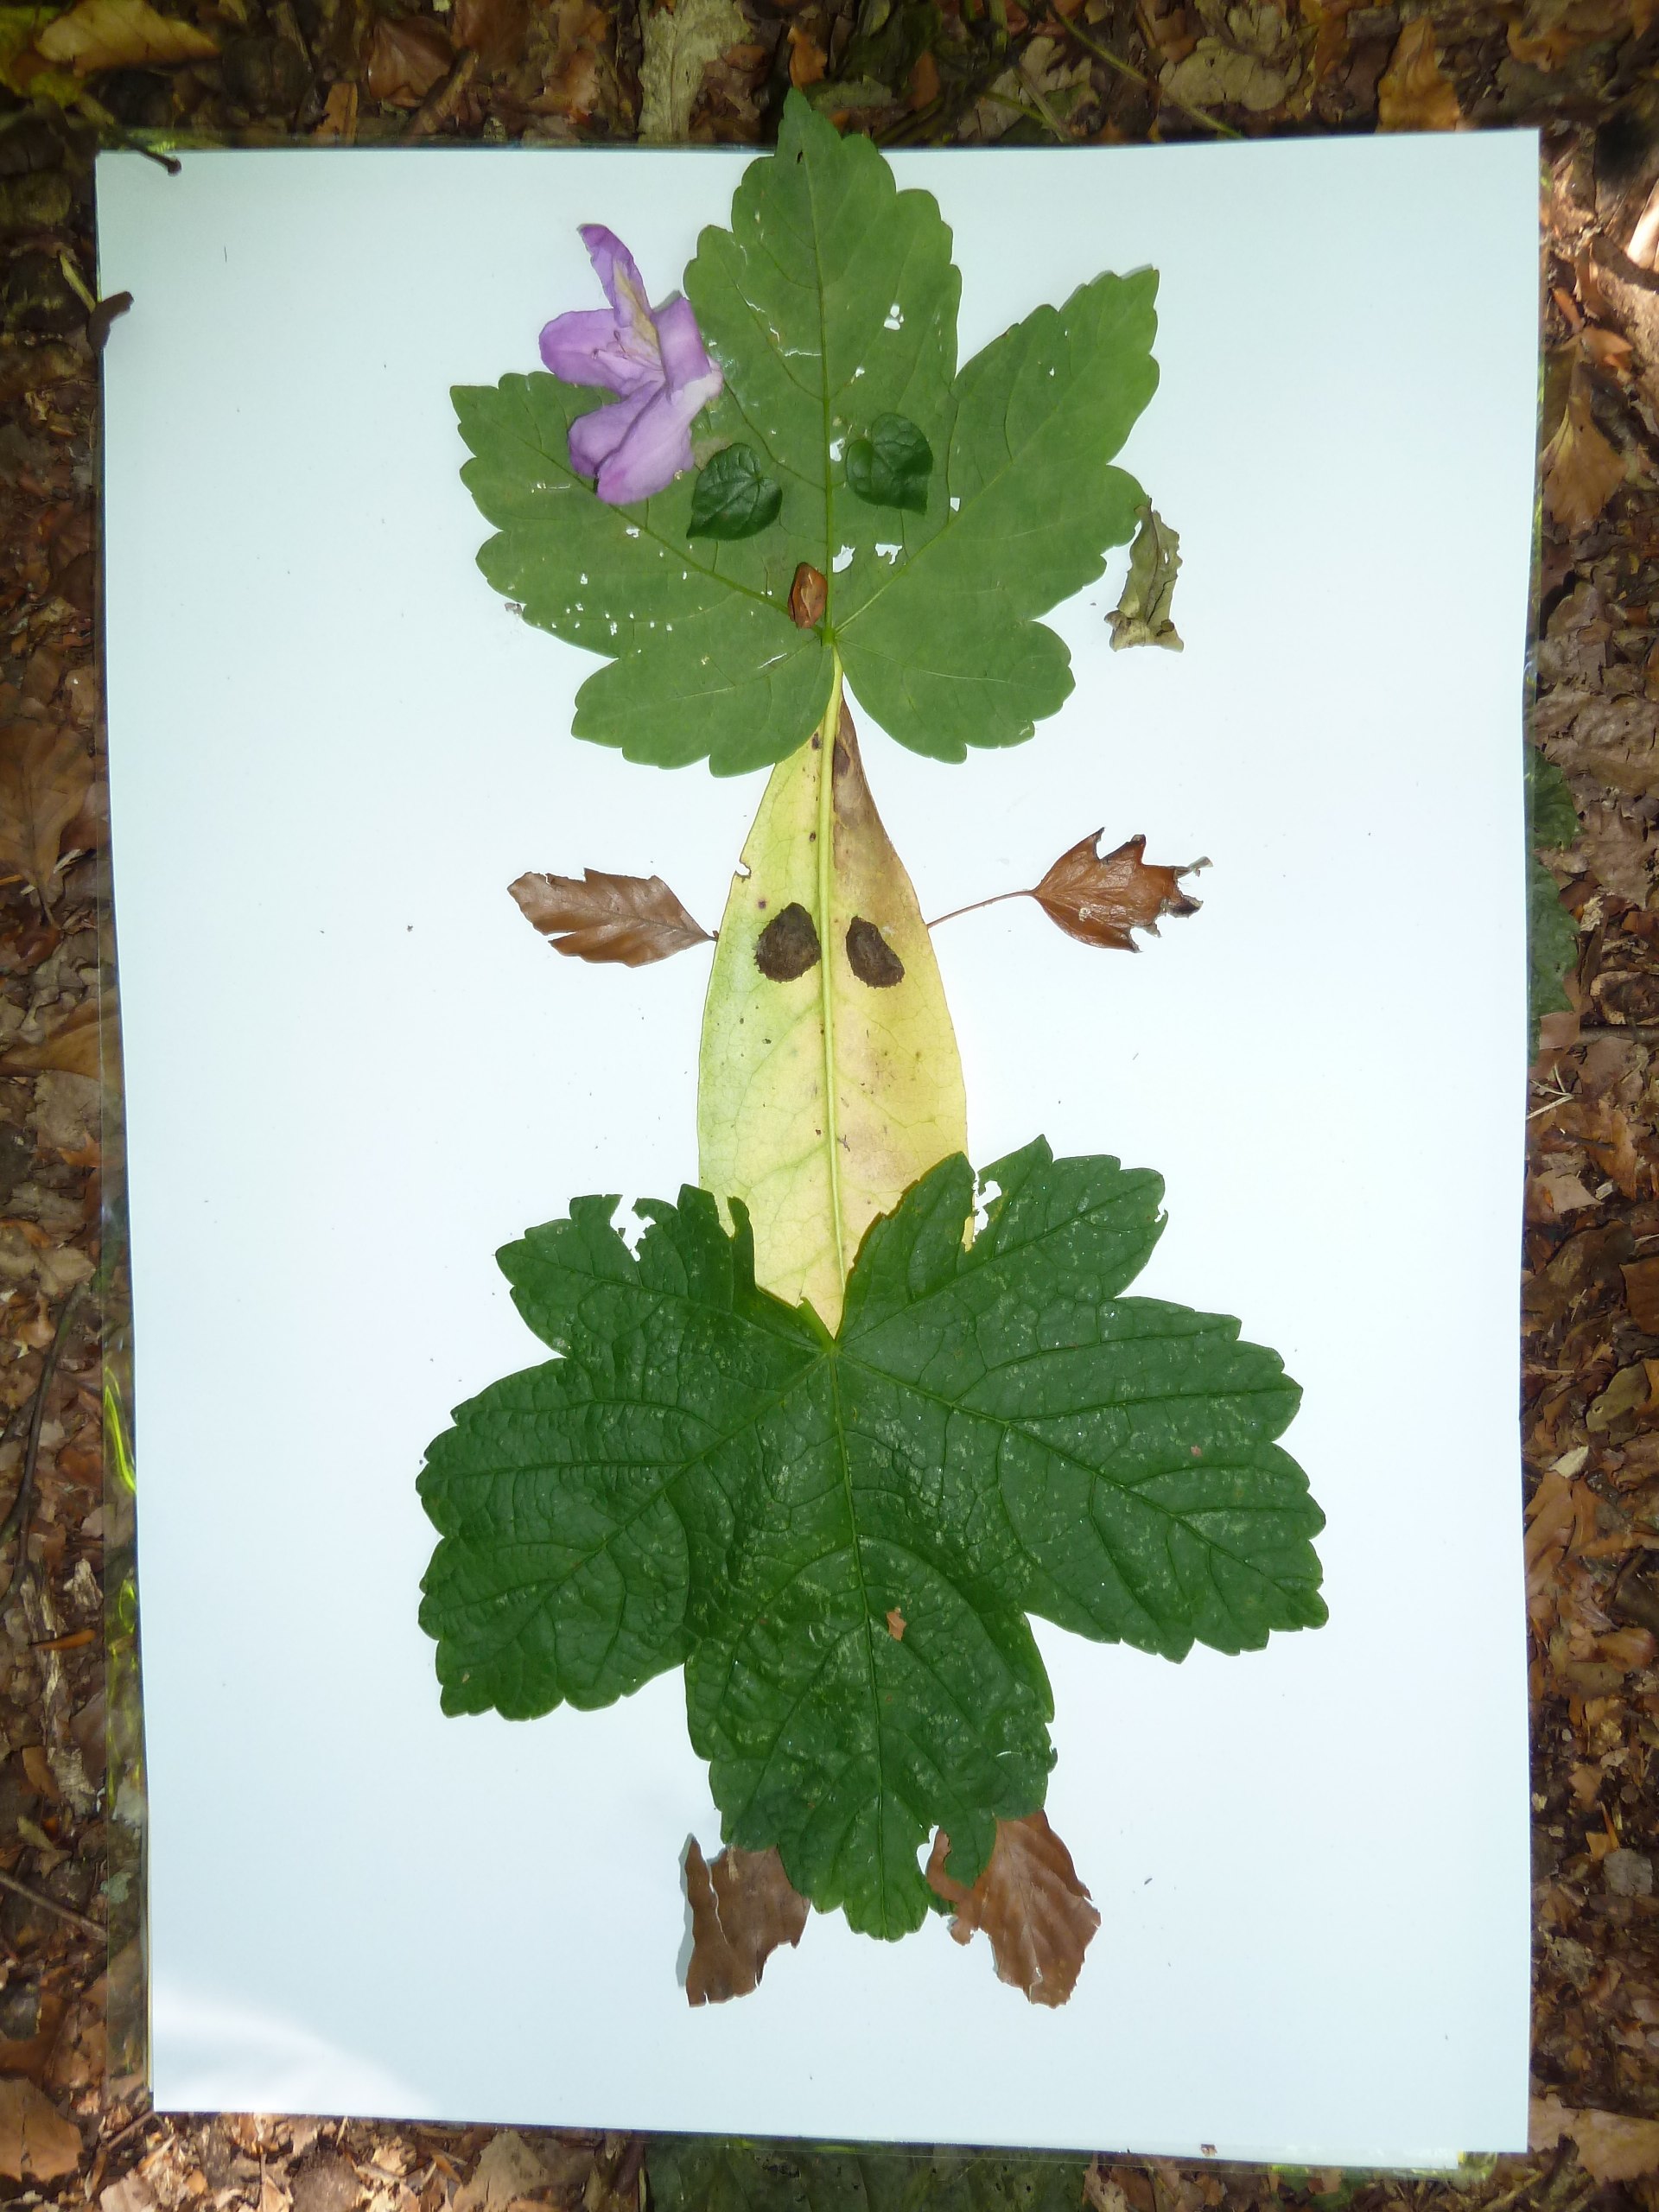 making our own leafmen (literacy)